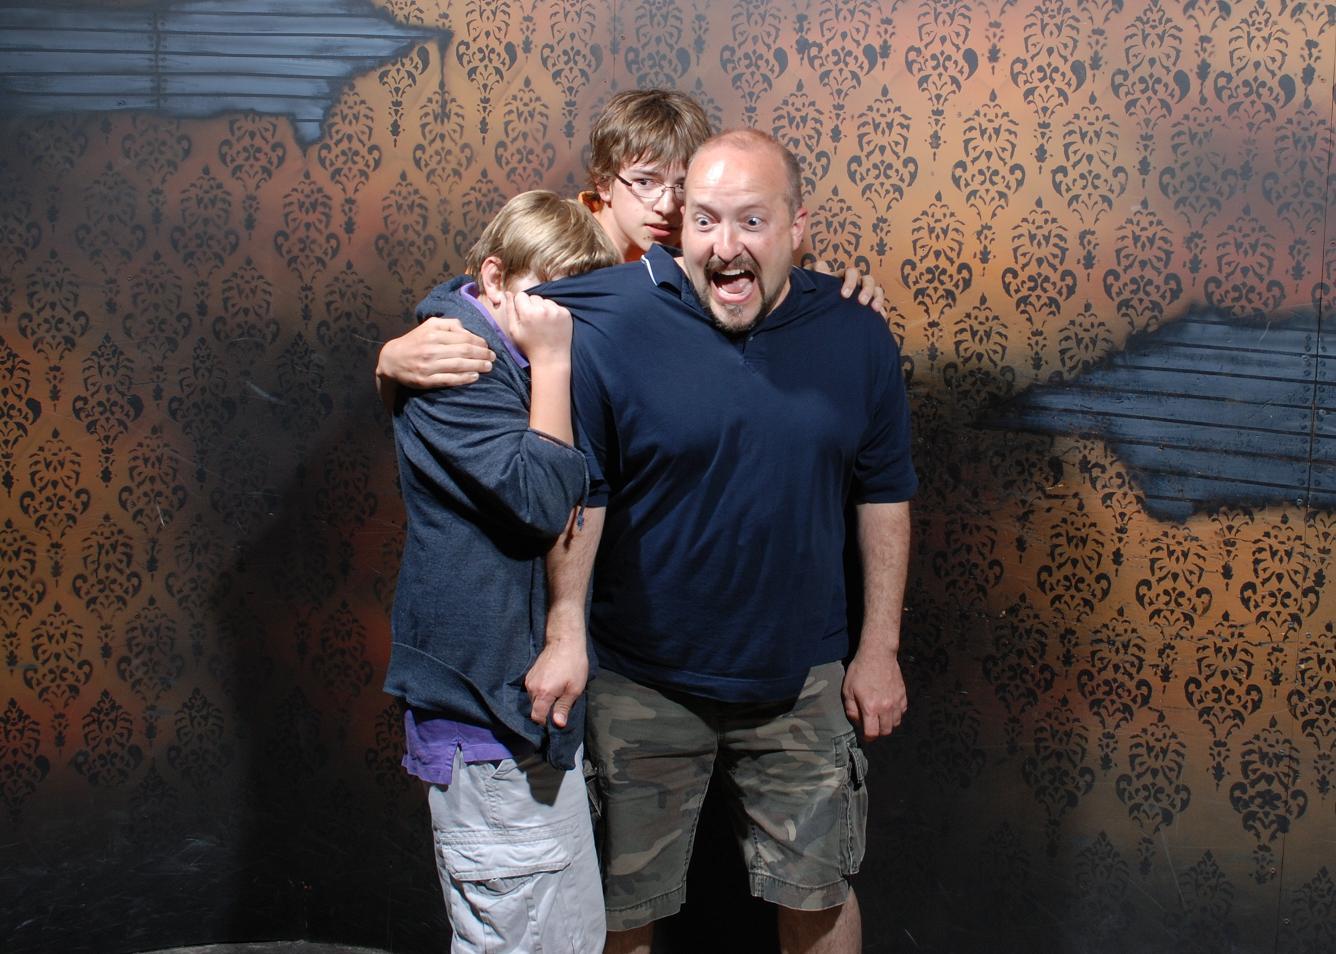 Top 40 FEAR Pics for September, 2012 | Nightmares Fear Factory1336 x 954